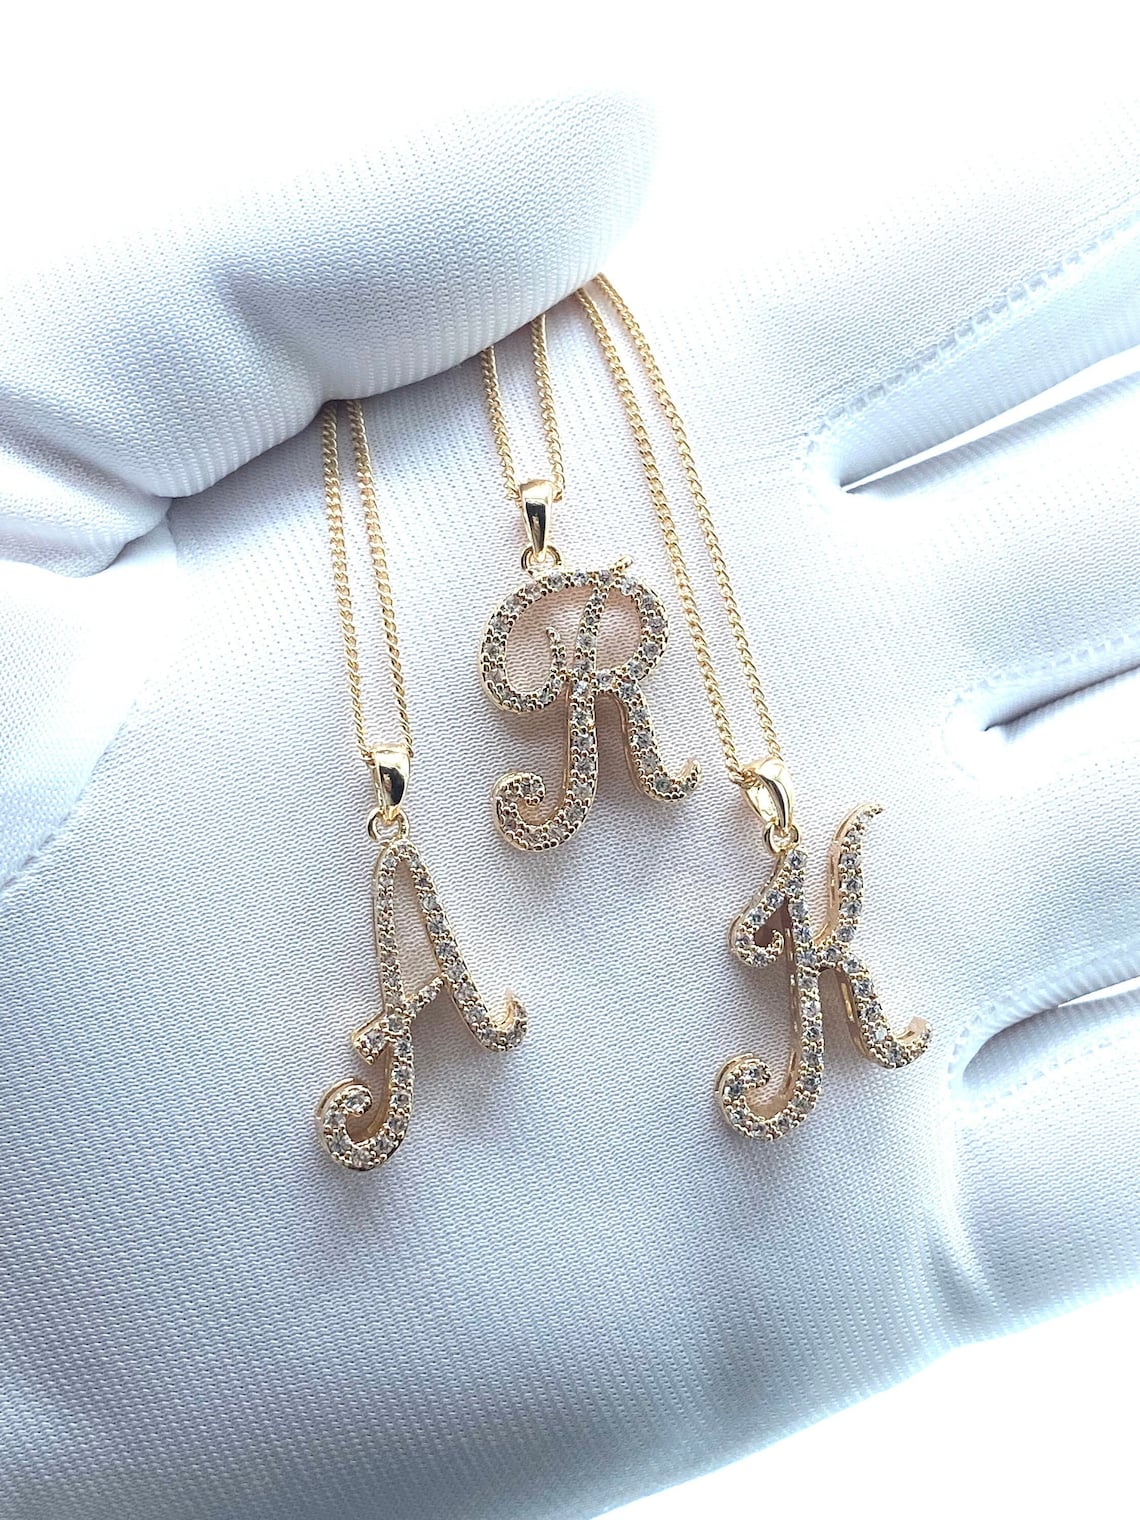 Initial Necklace 24 KT Gold Filled and Silver CZ Diamonds - Etsy